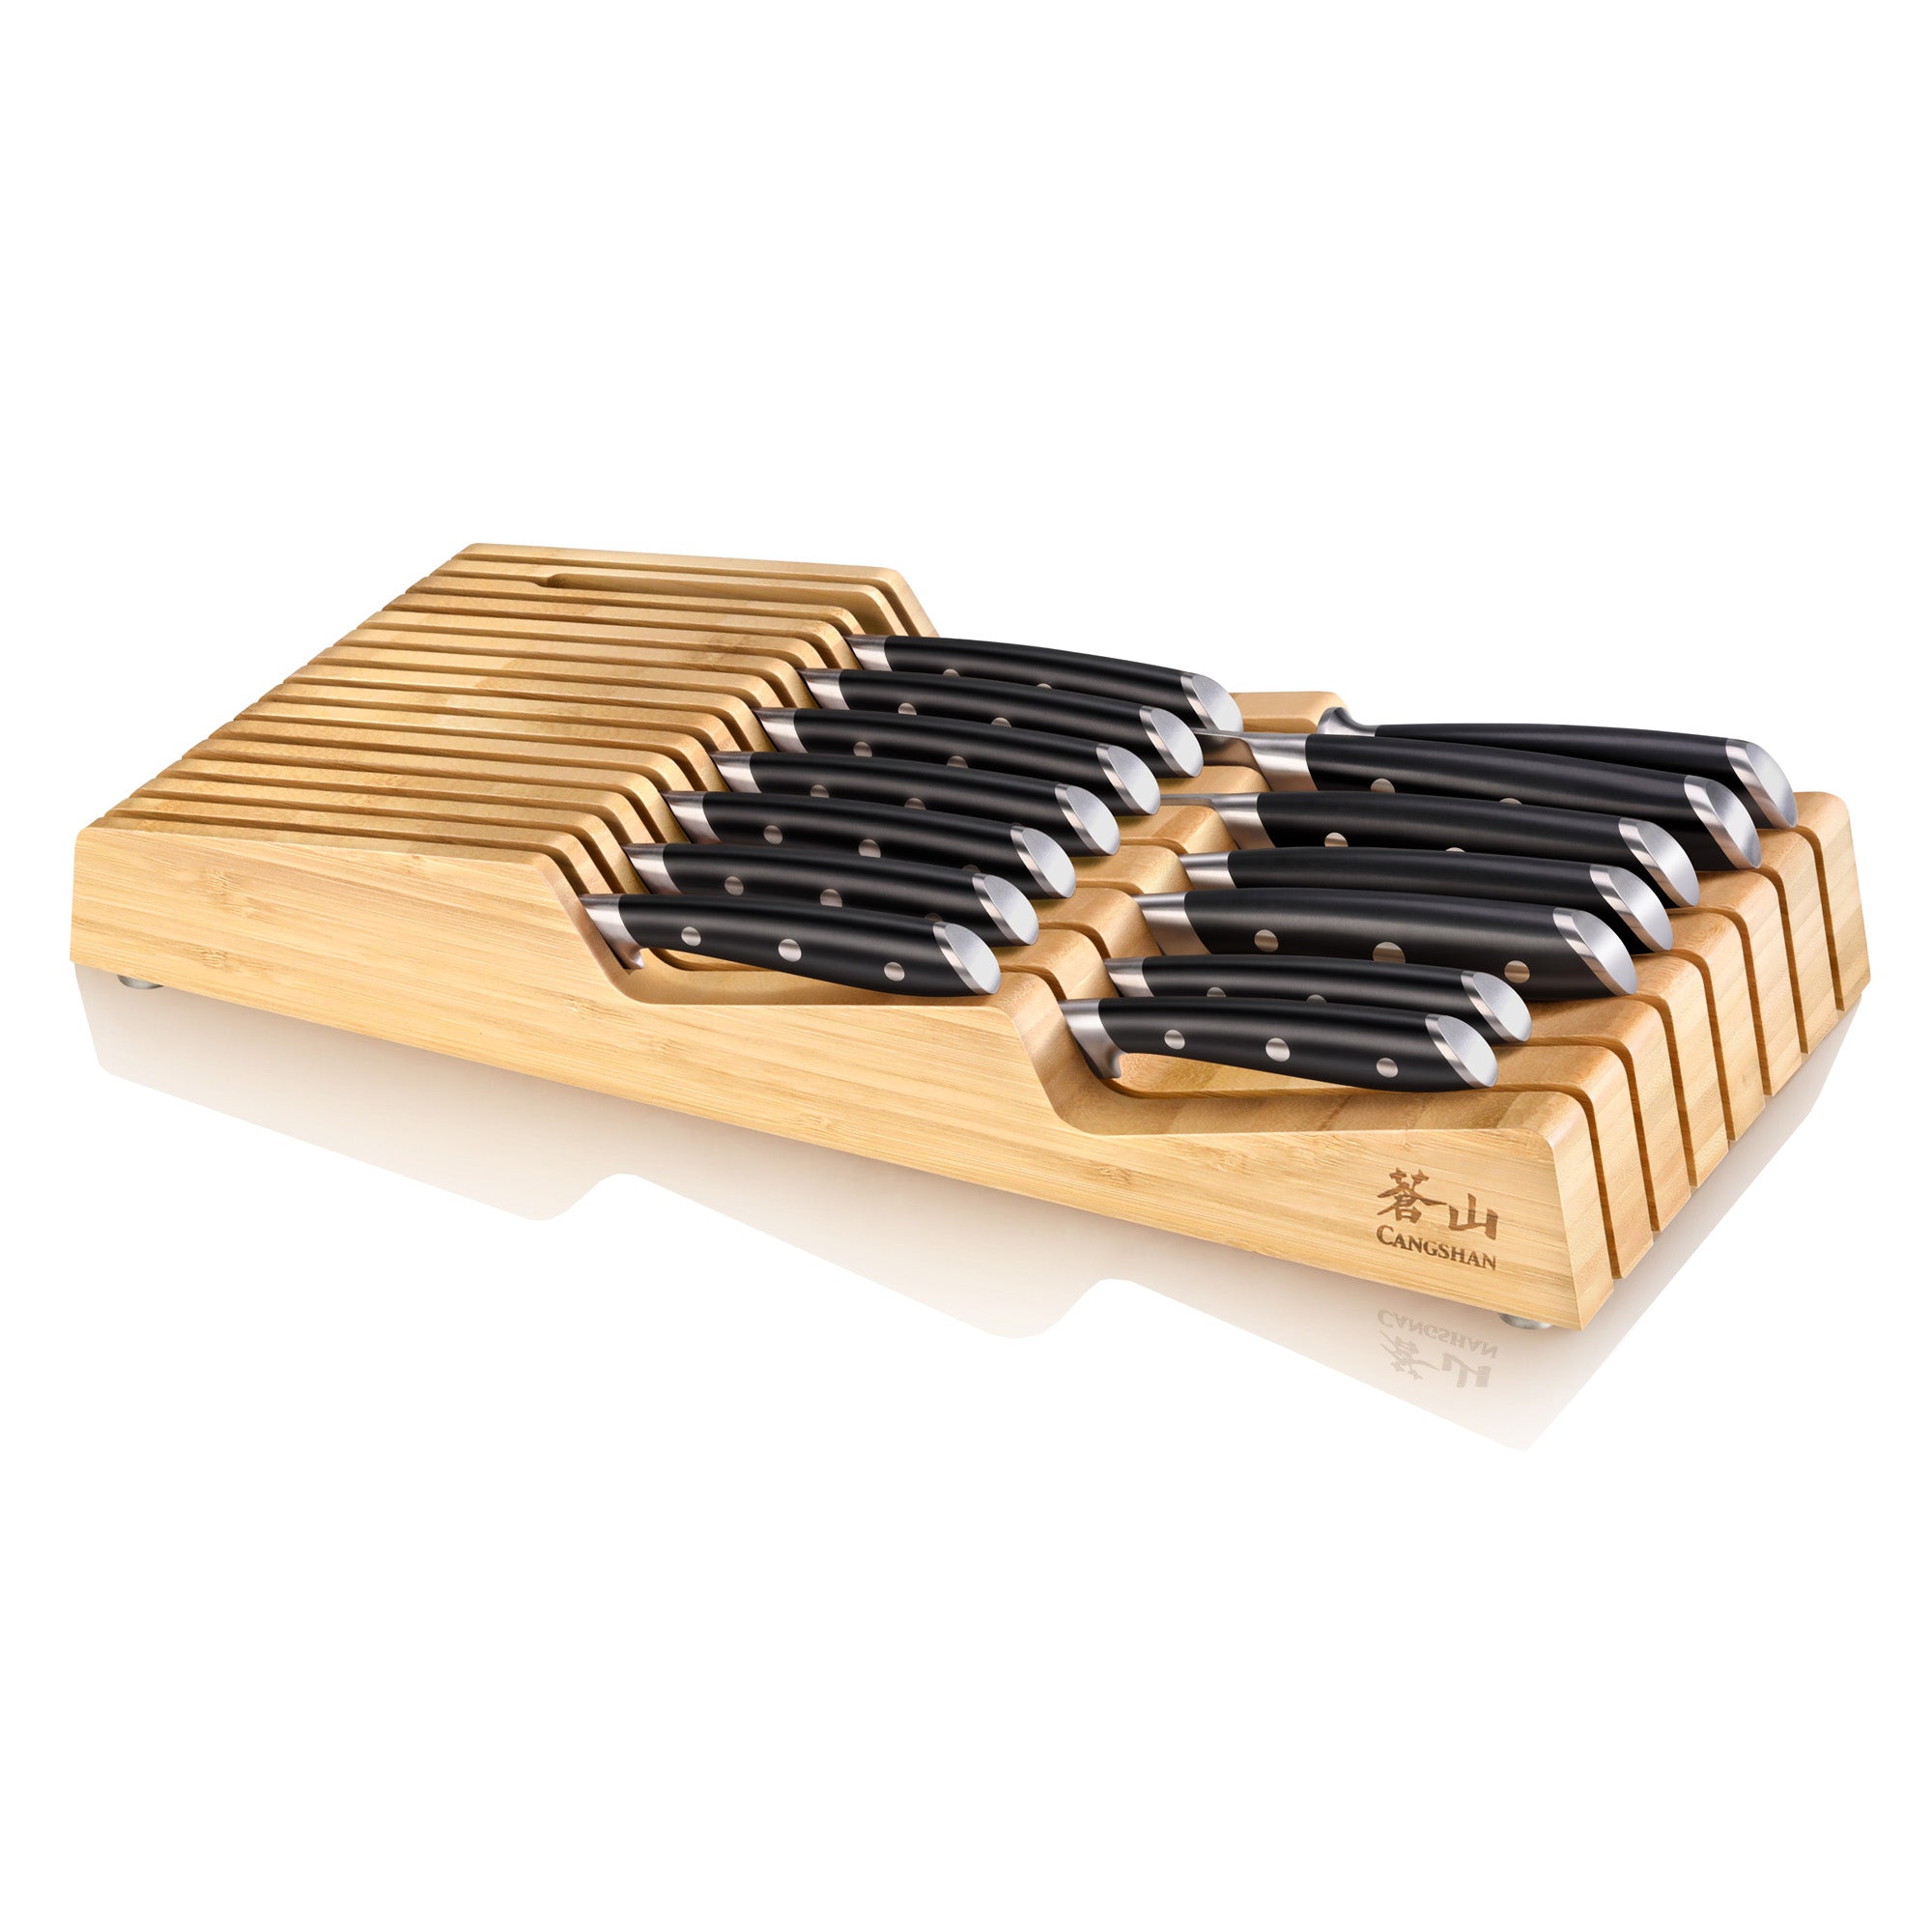 11 Piece Stainless Steel Kitchen Knife Set with In-Drawer Bamboo Block –  Shenzhen Knives